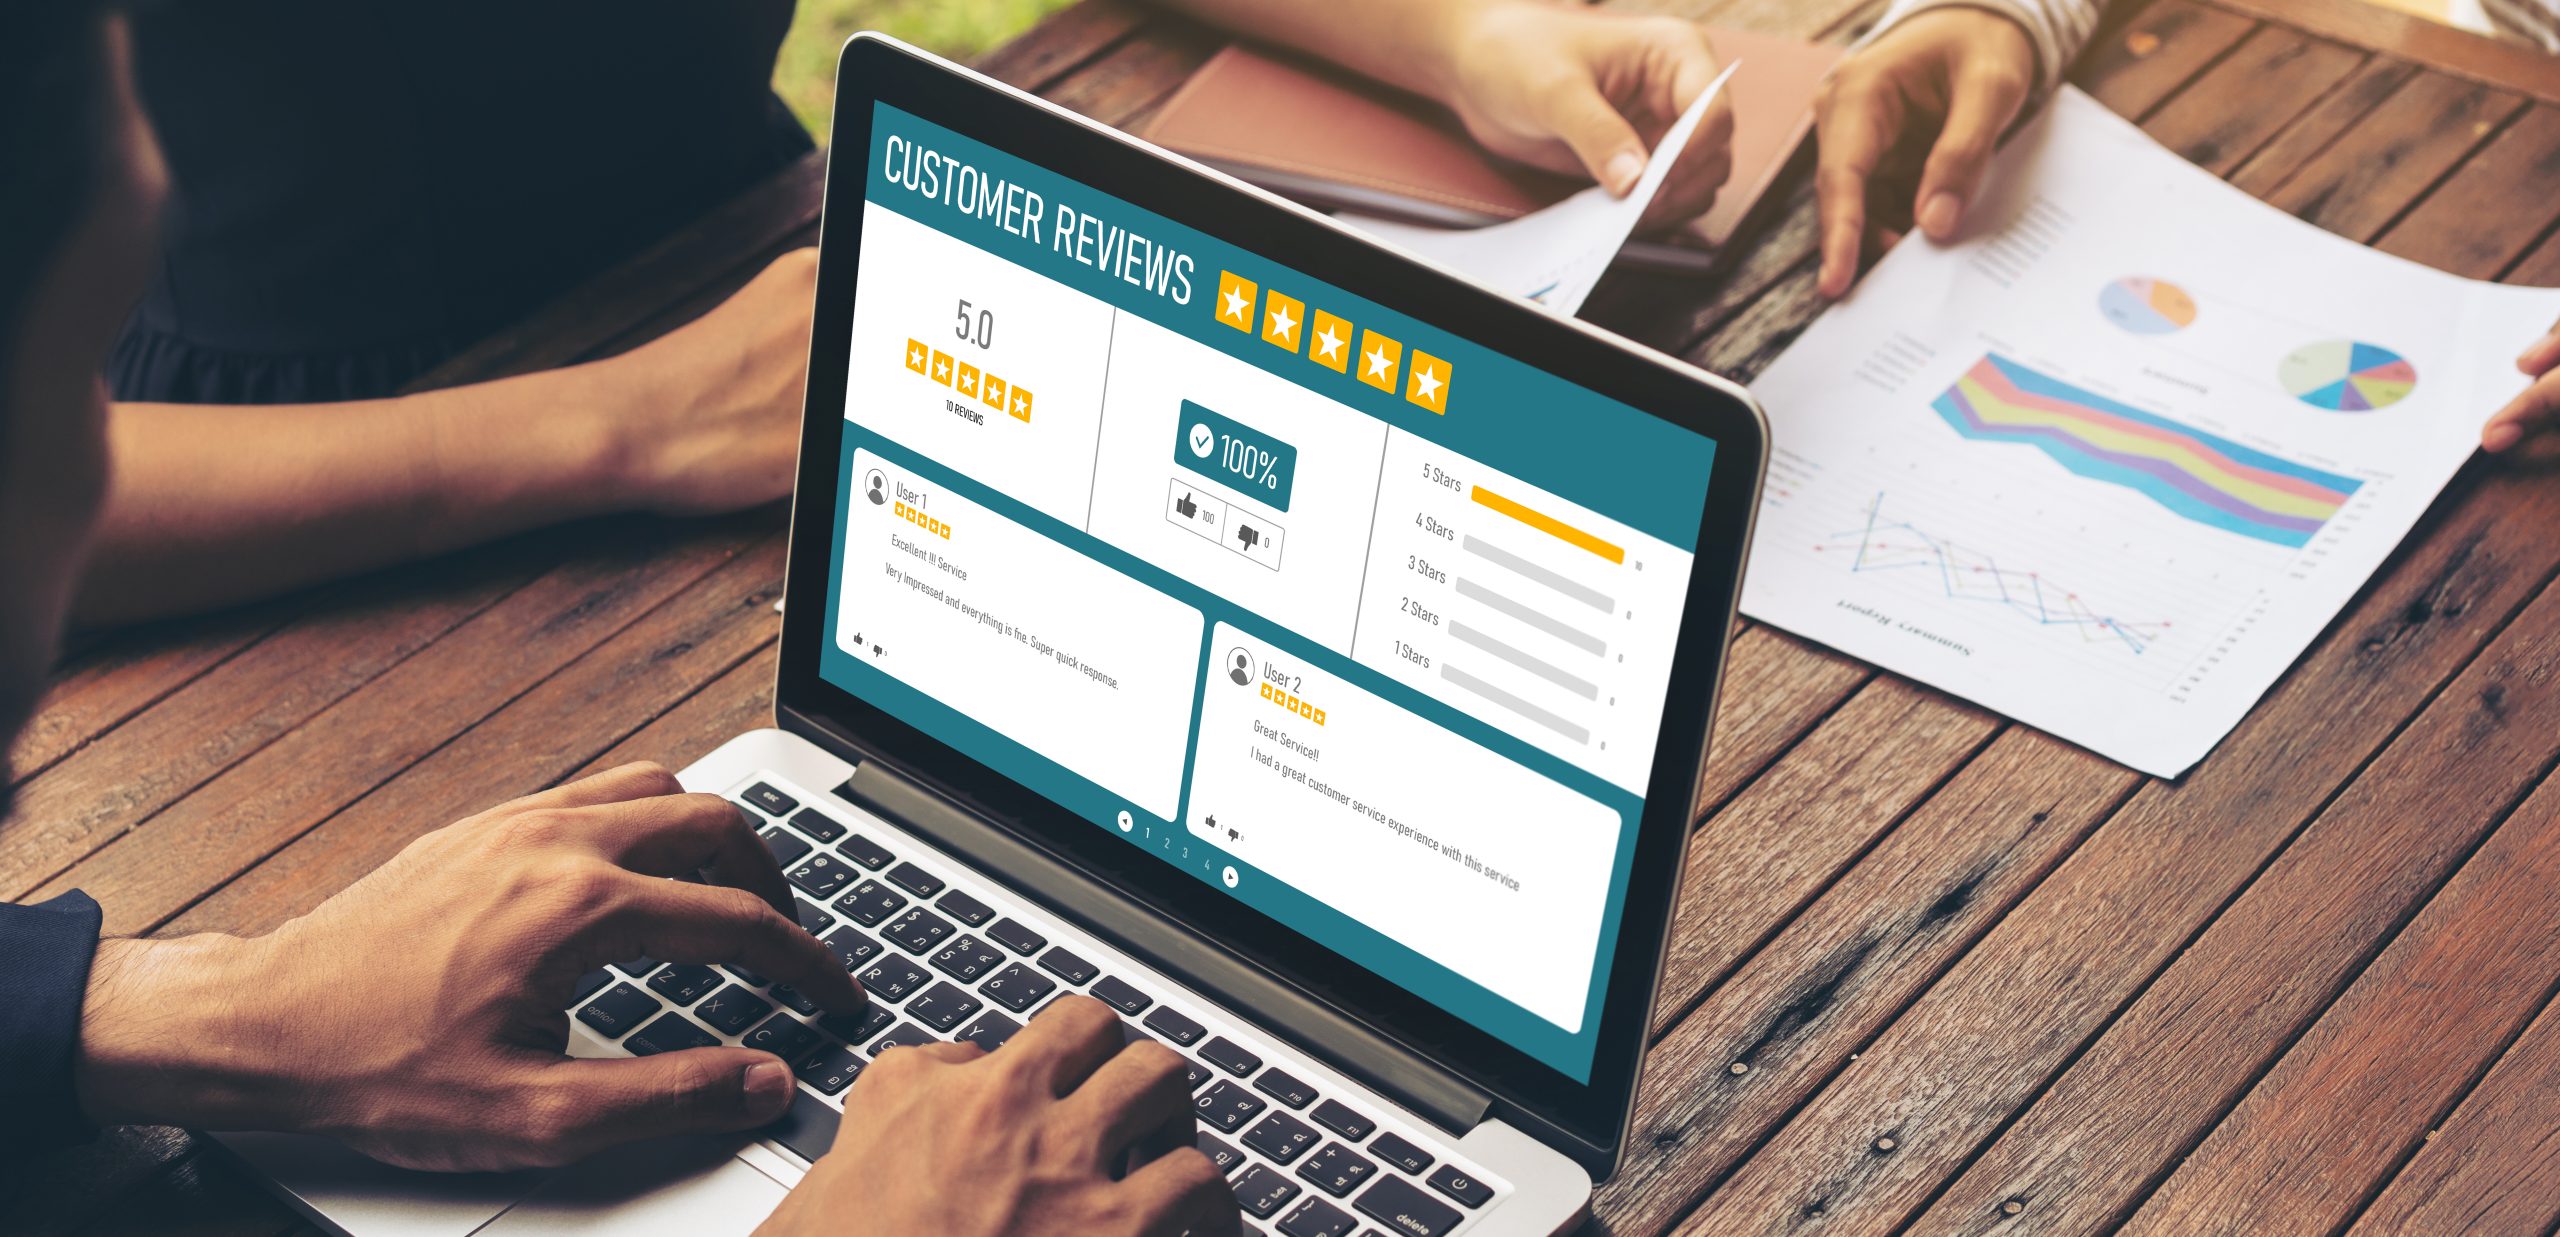 How to Monitor Online Reviews for Small Businesses